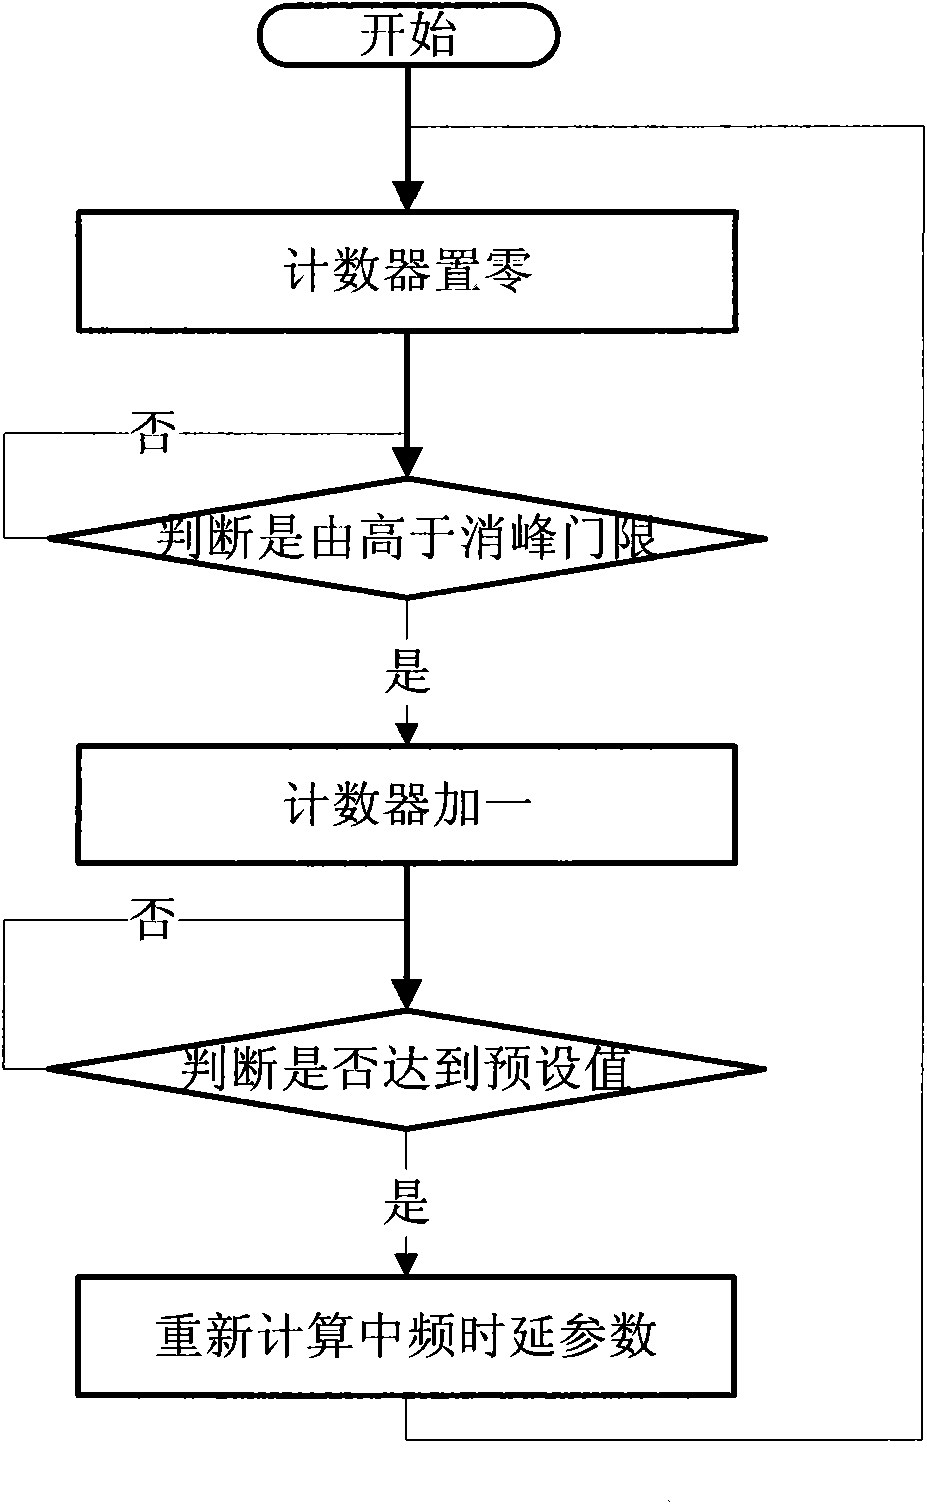 Method and system for reducing multi-carrier peak average ratio